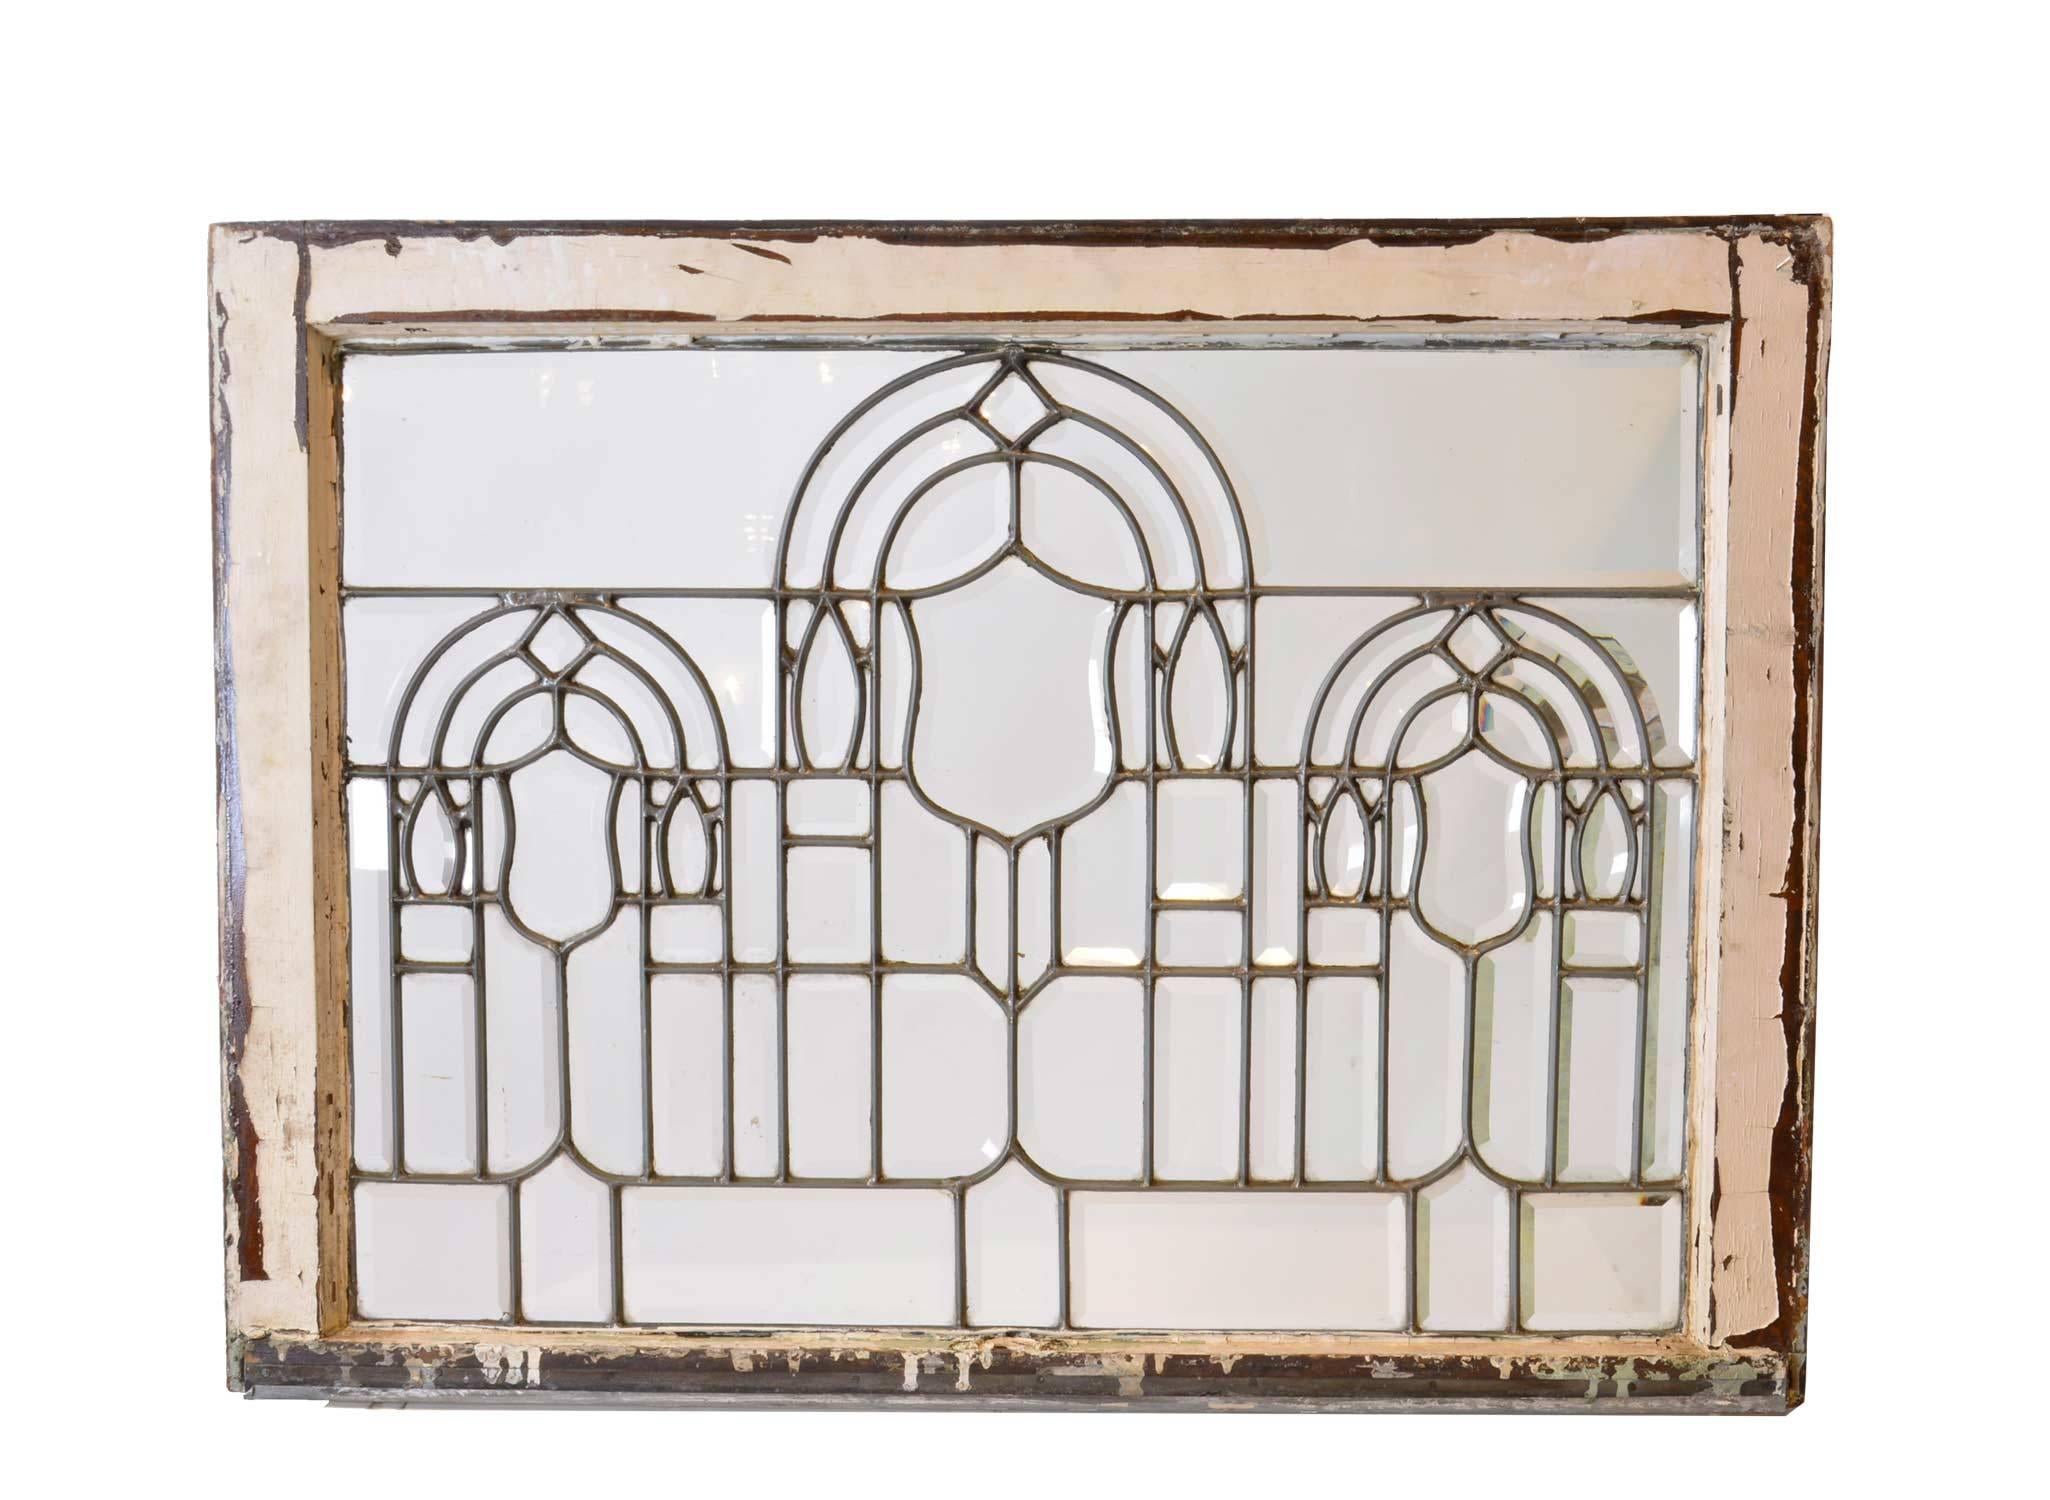 American Turn-of-the-Century Beveled Glass Window with Arches For Sale